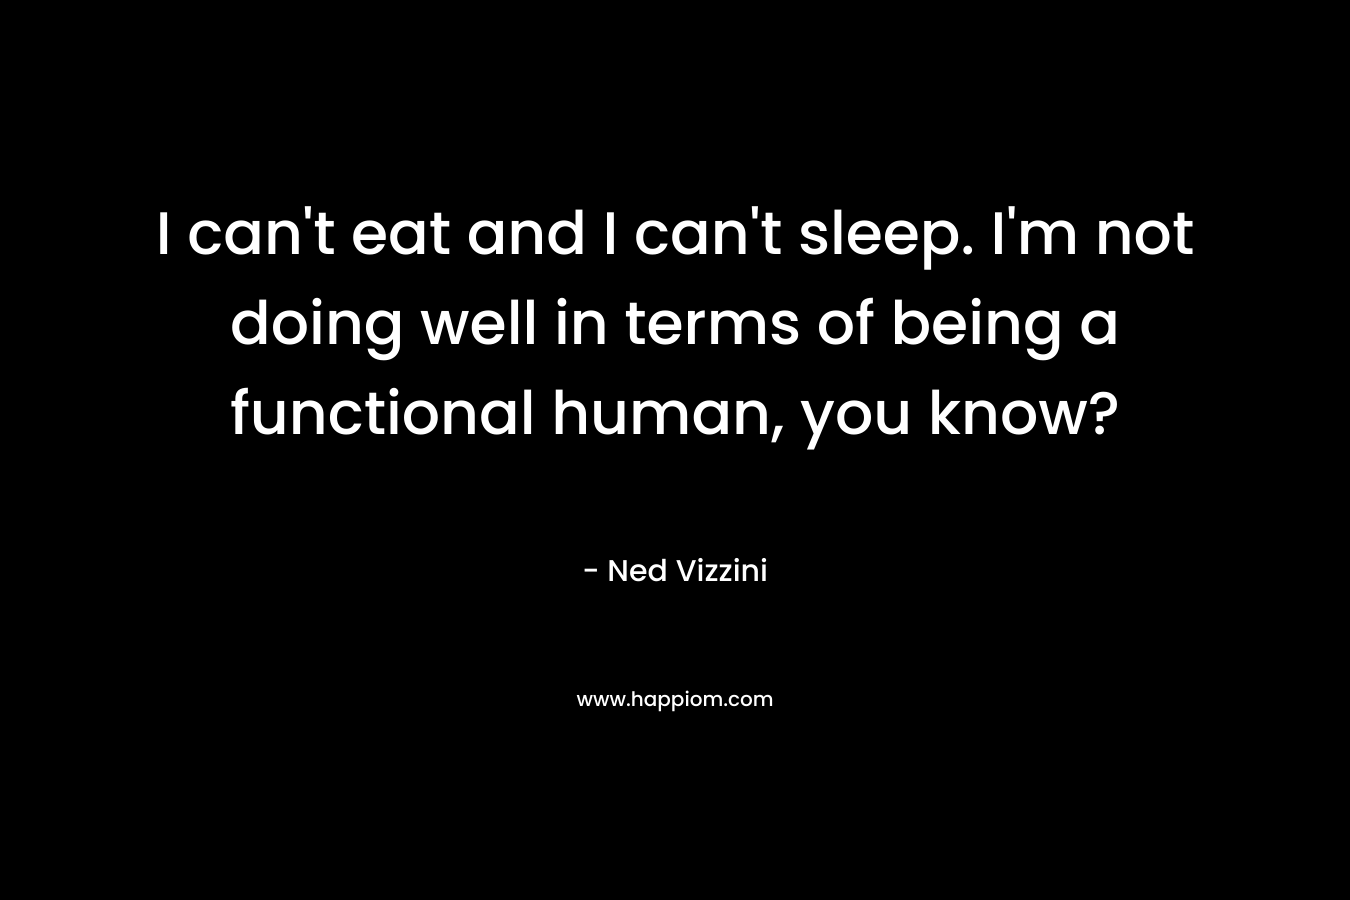 I can't eat and I can't sleep. I'm not doing well in terms of being a functional human, you know?